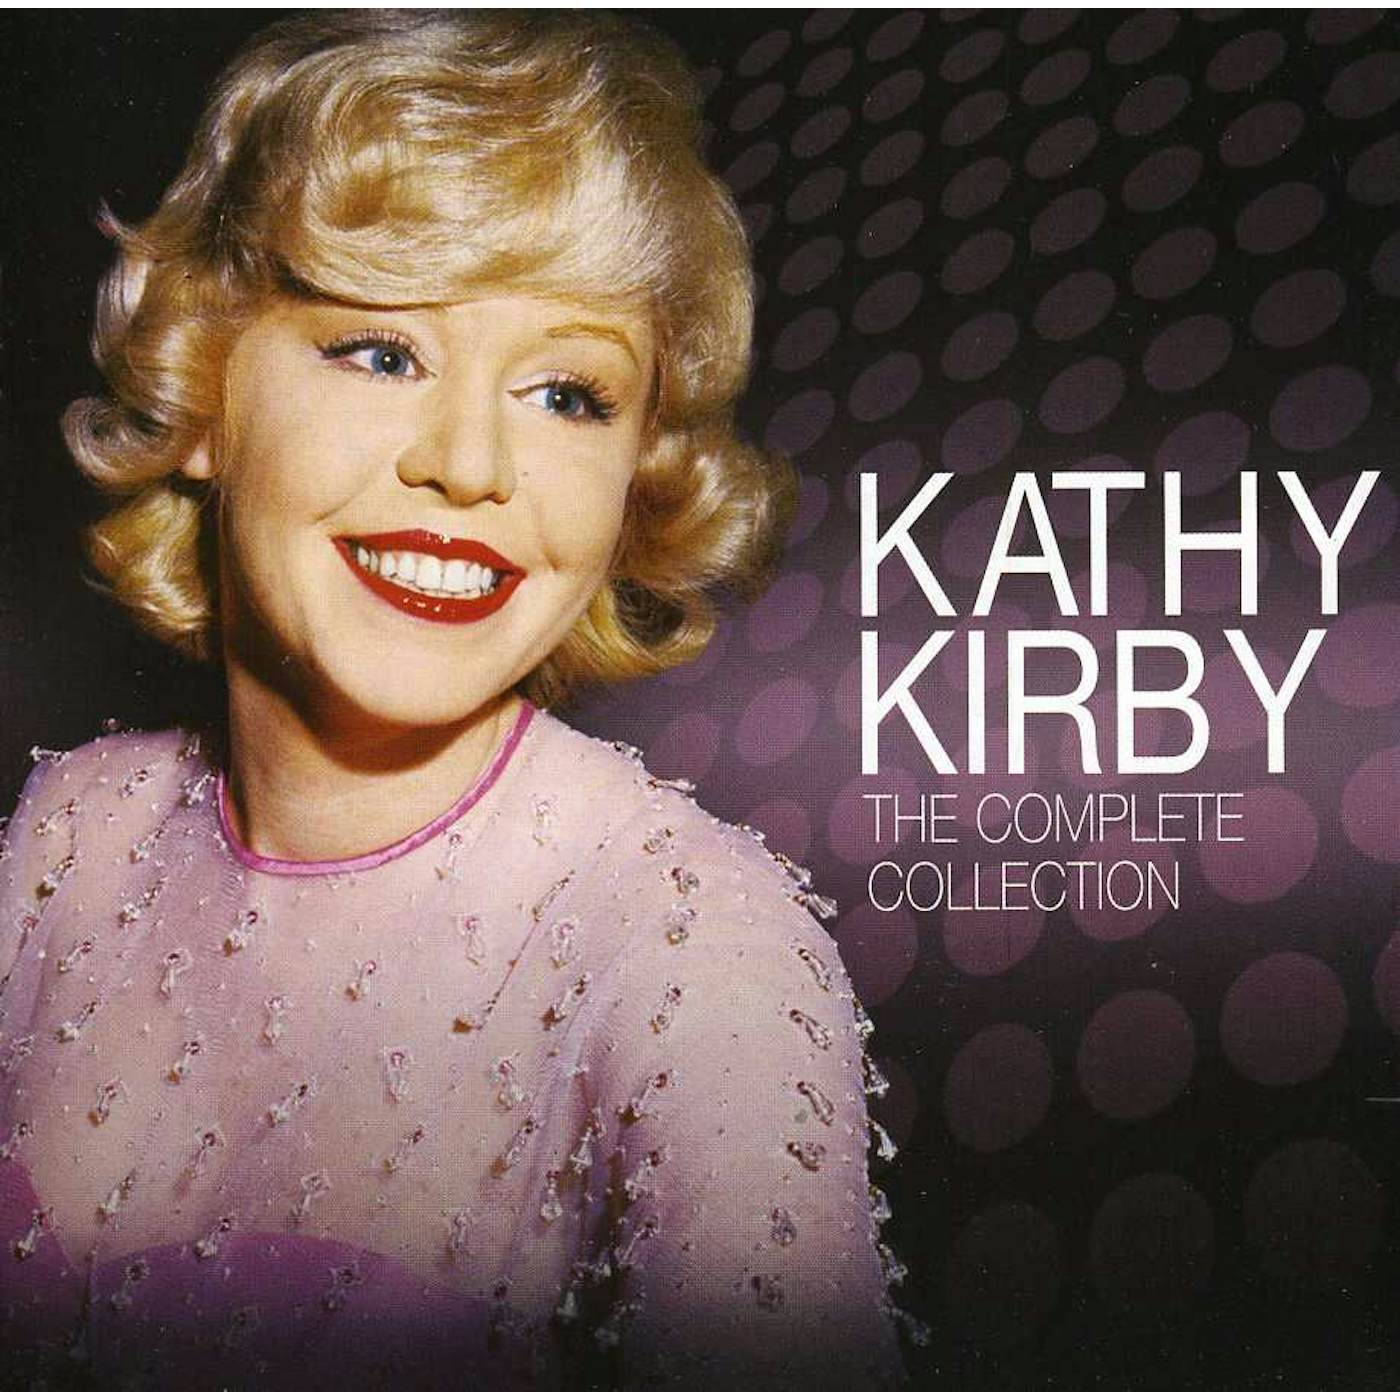 Kathy Kirby COMPLETE COLLECTION CD